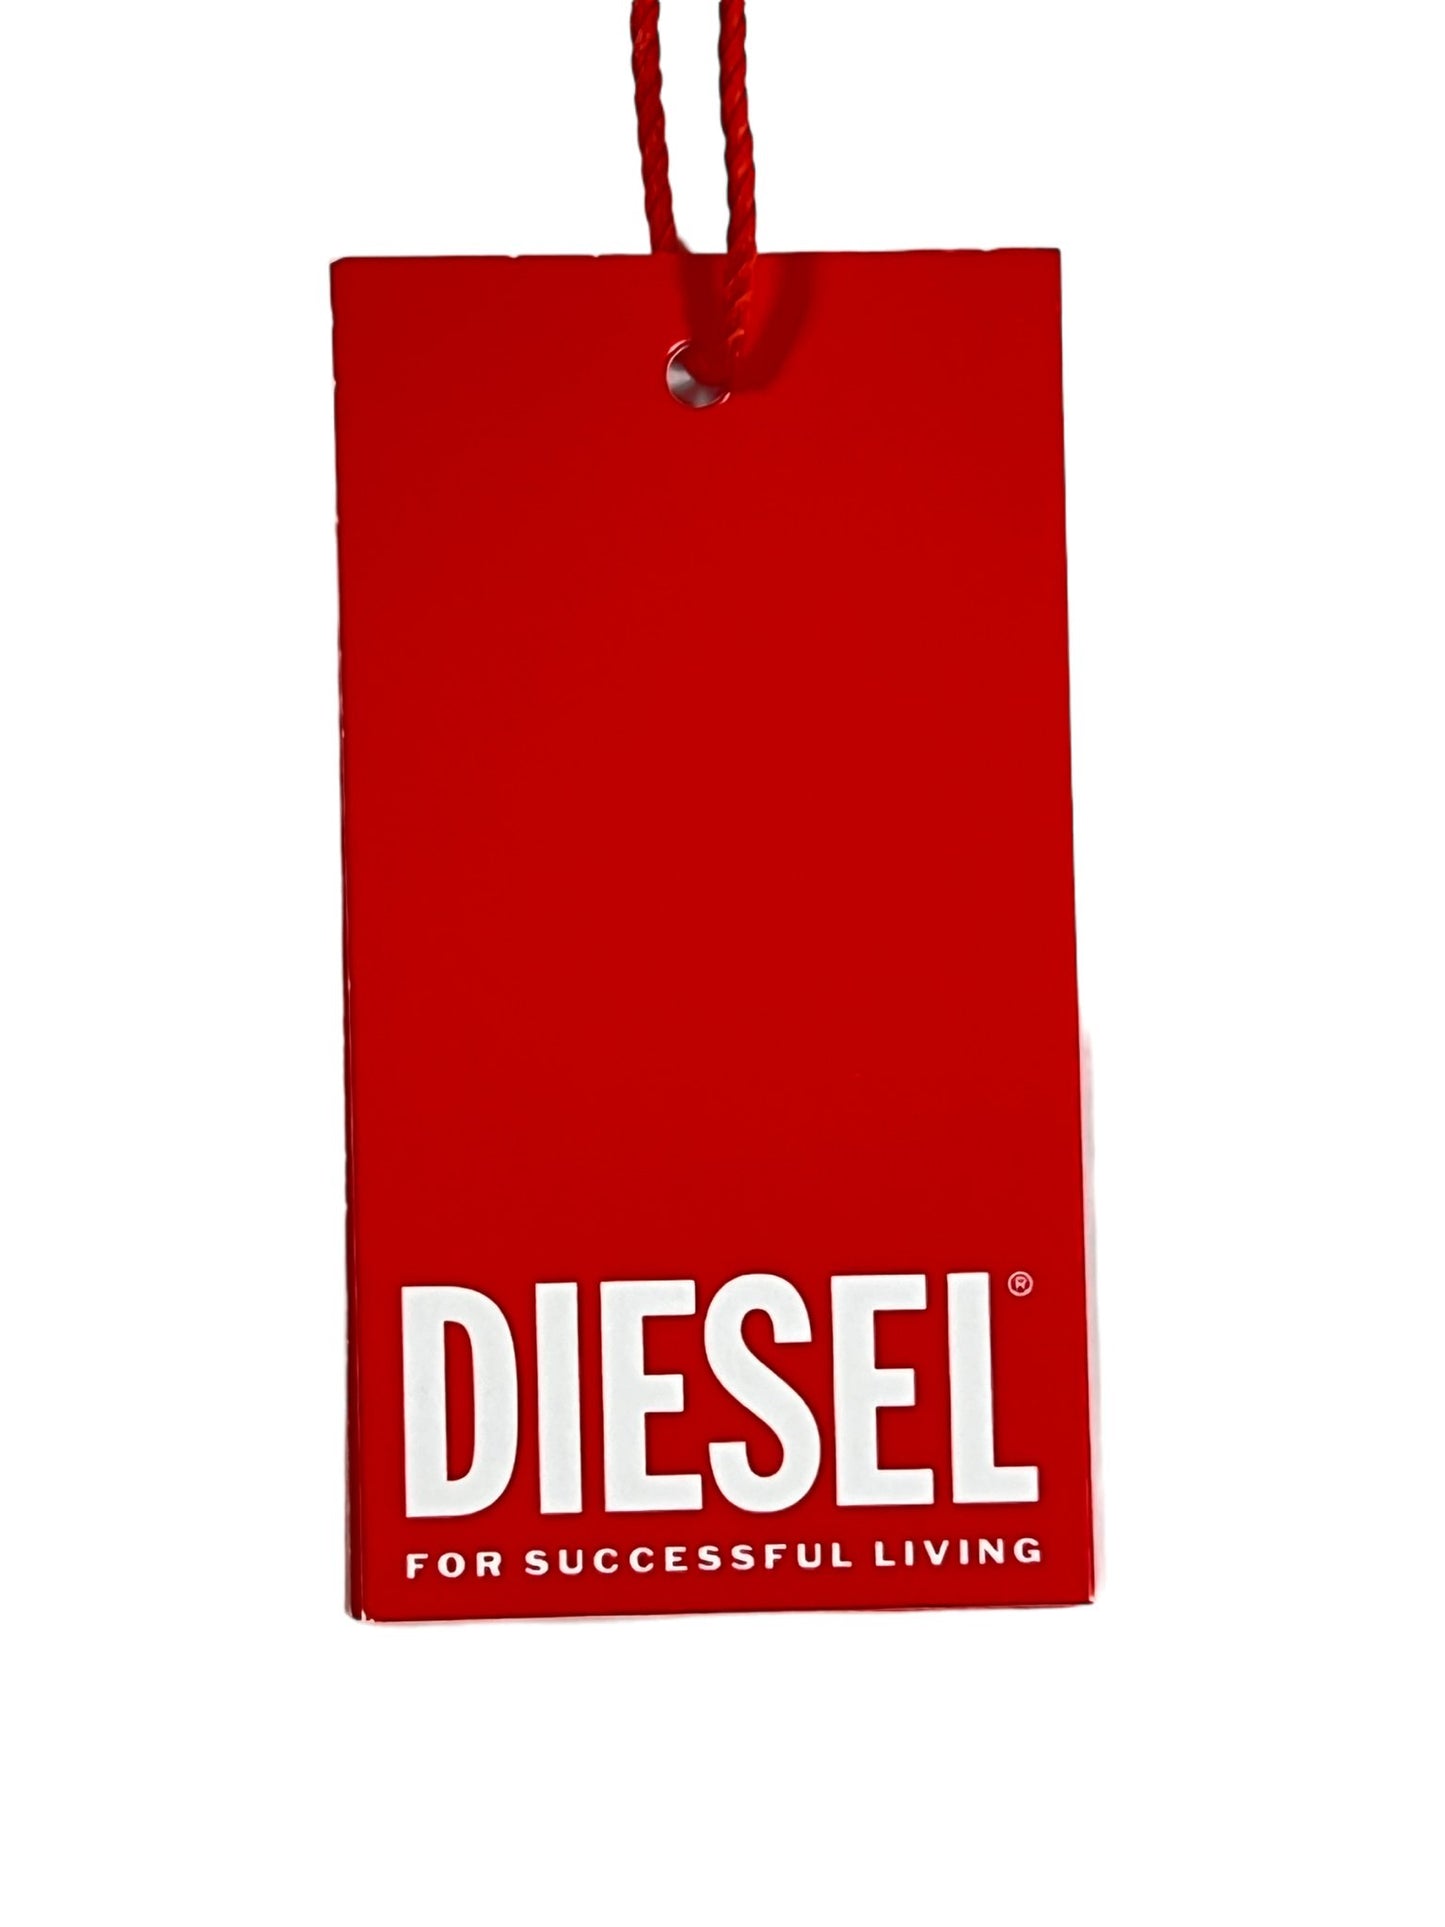 Red price tag with Diesel iconic logo and slogan "for successful living" on the DIESEL T-JUST-N14 T-SHIRT BLACK.